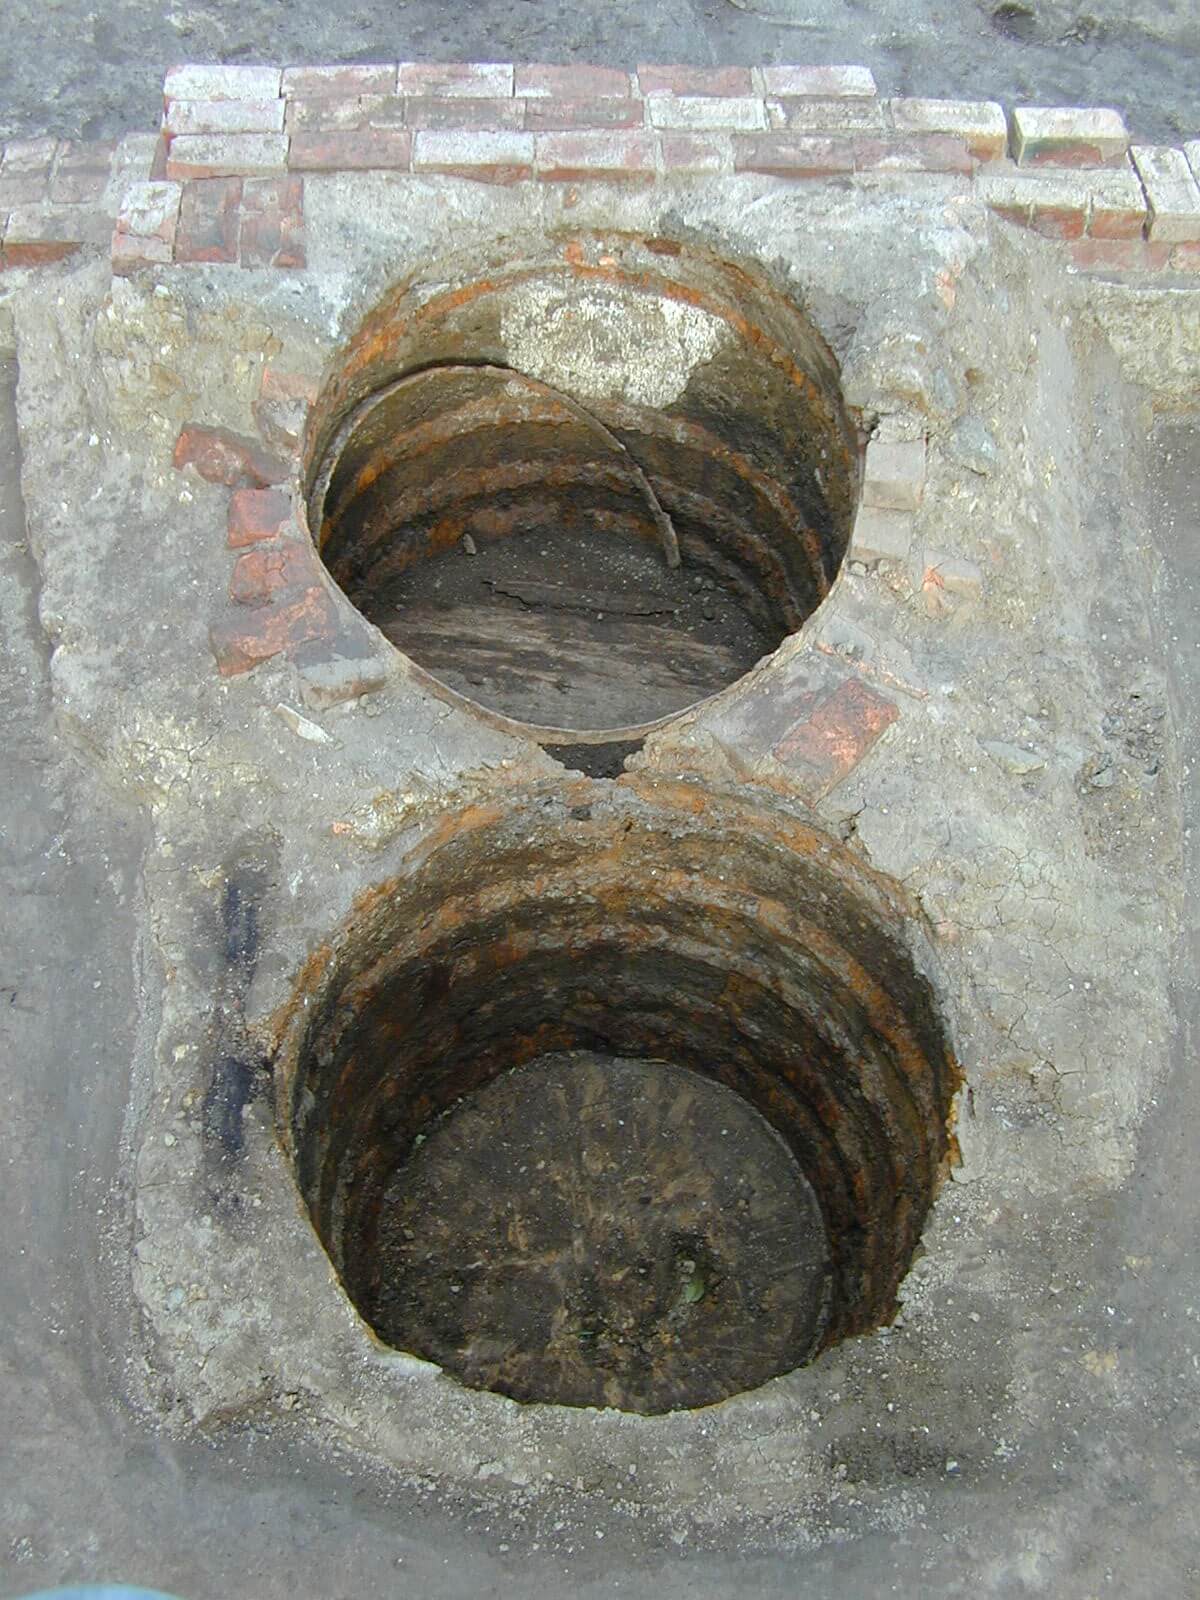 Dual cesspit. Two holes in a brick ground. they are clean, but old and have seen use quite some time ago.